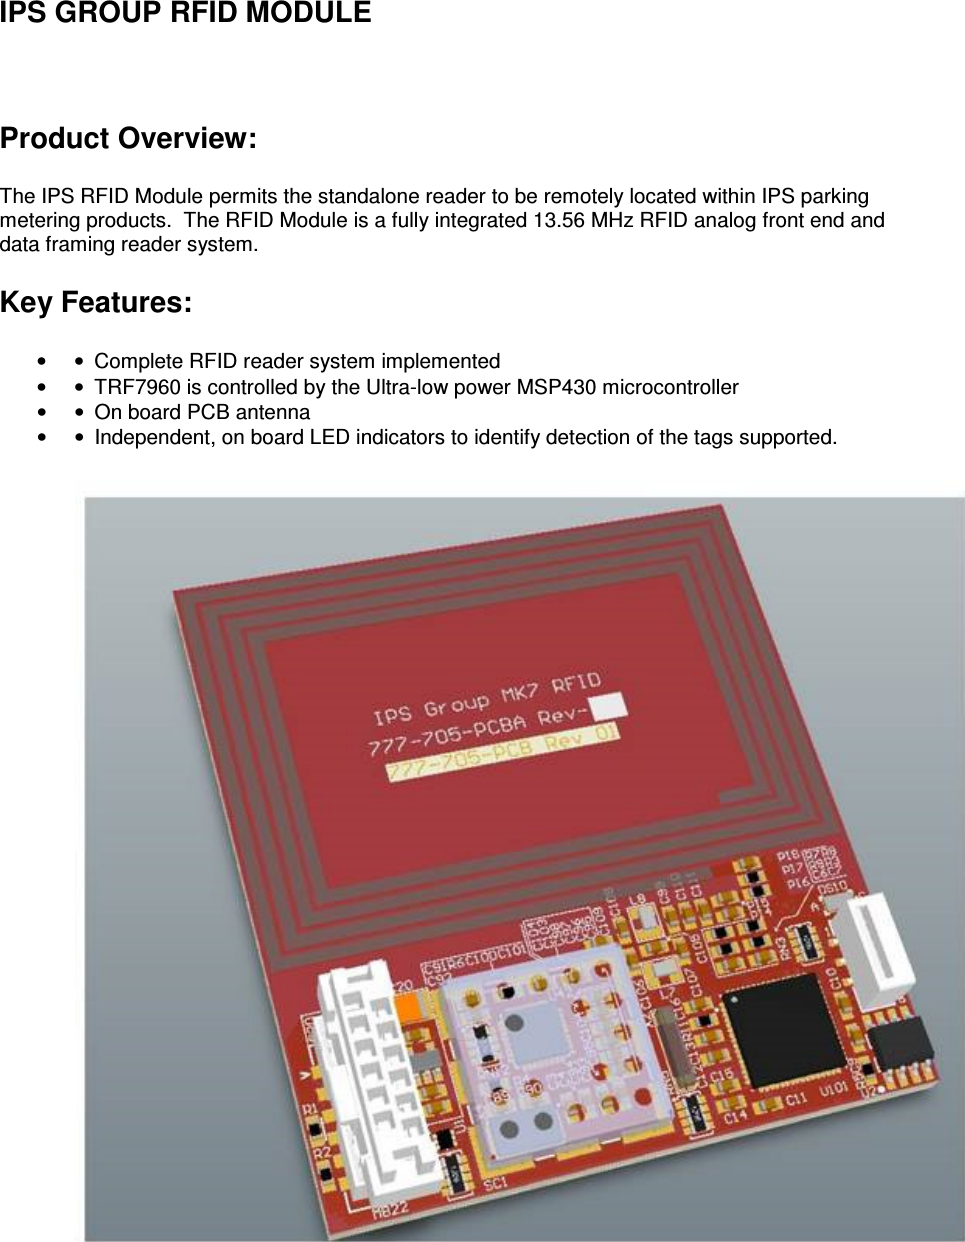 IPS GROUP RFID MODULE  Product Overview:  The IPS RFID Module permits the standalone reader to be remotely located within IPS parking metering products.  The RFID Module is a fully integrated 13.56 MHz RFID analog front end and data framing reader system.  Key Features:  • •  Complete RFID reader system implemented  • •  TRF7960 is controlled by the Ultra-low power MSP430 microcontroller  • •  On board PCB antenna   • •  Independent, on board LED indicators to identify detection of the tags supported.    